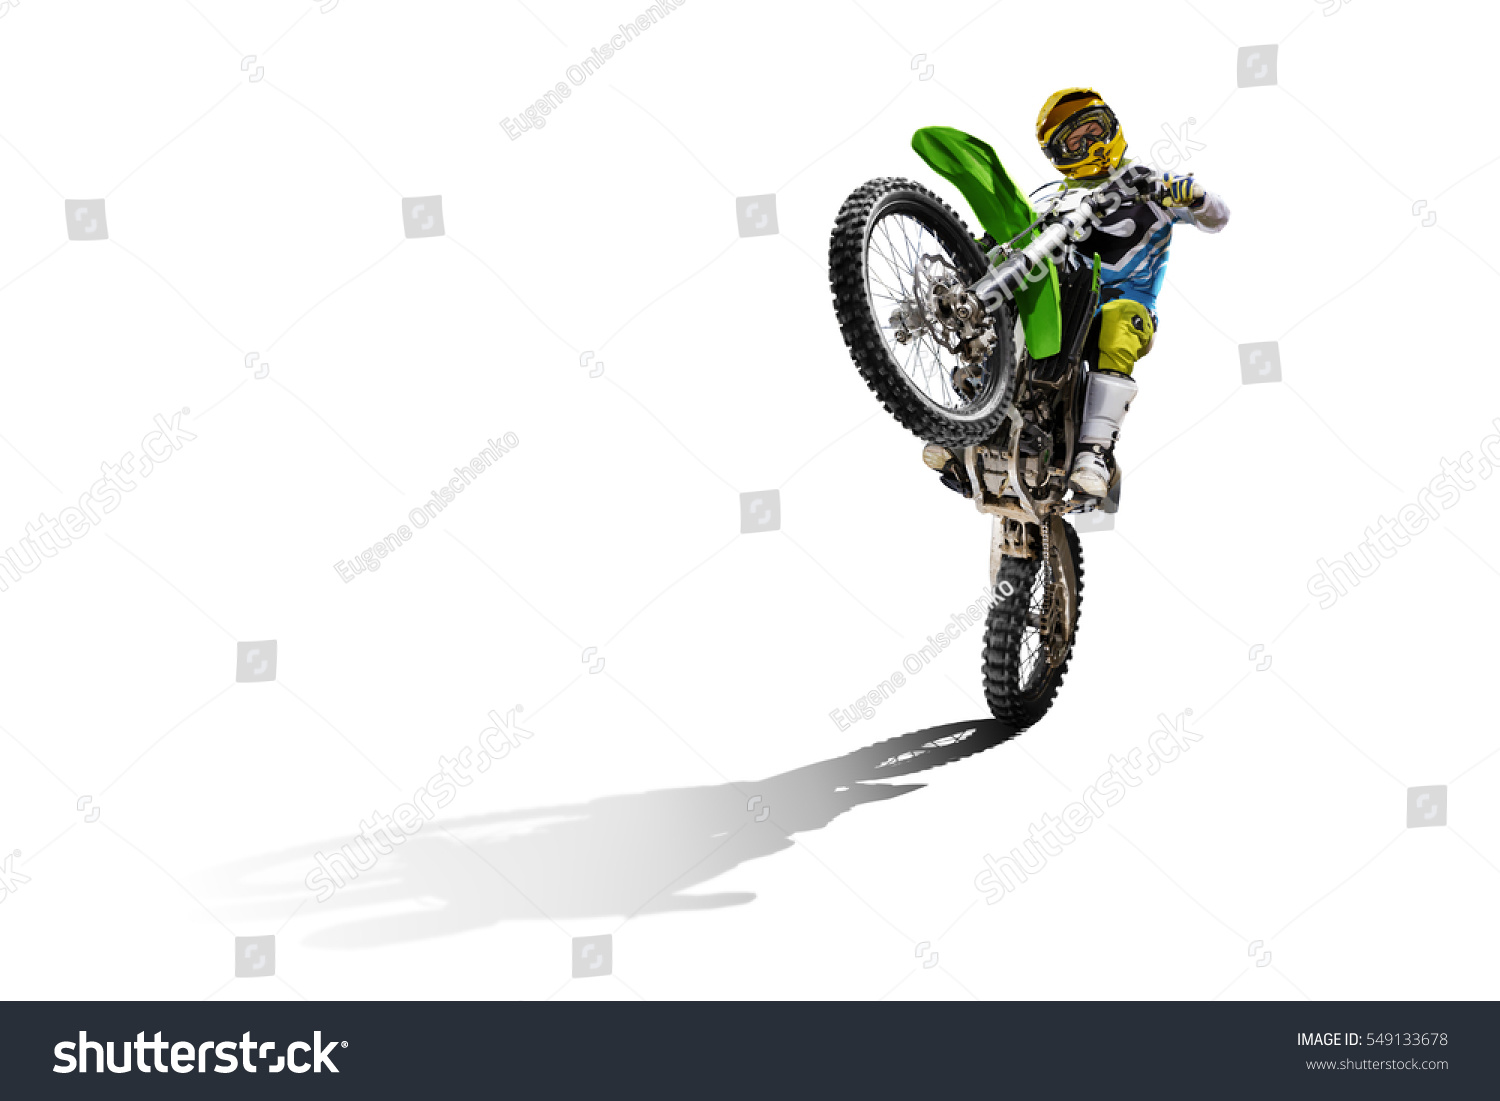 Dirt bike and rider isolated on white #549133678